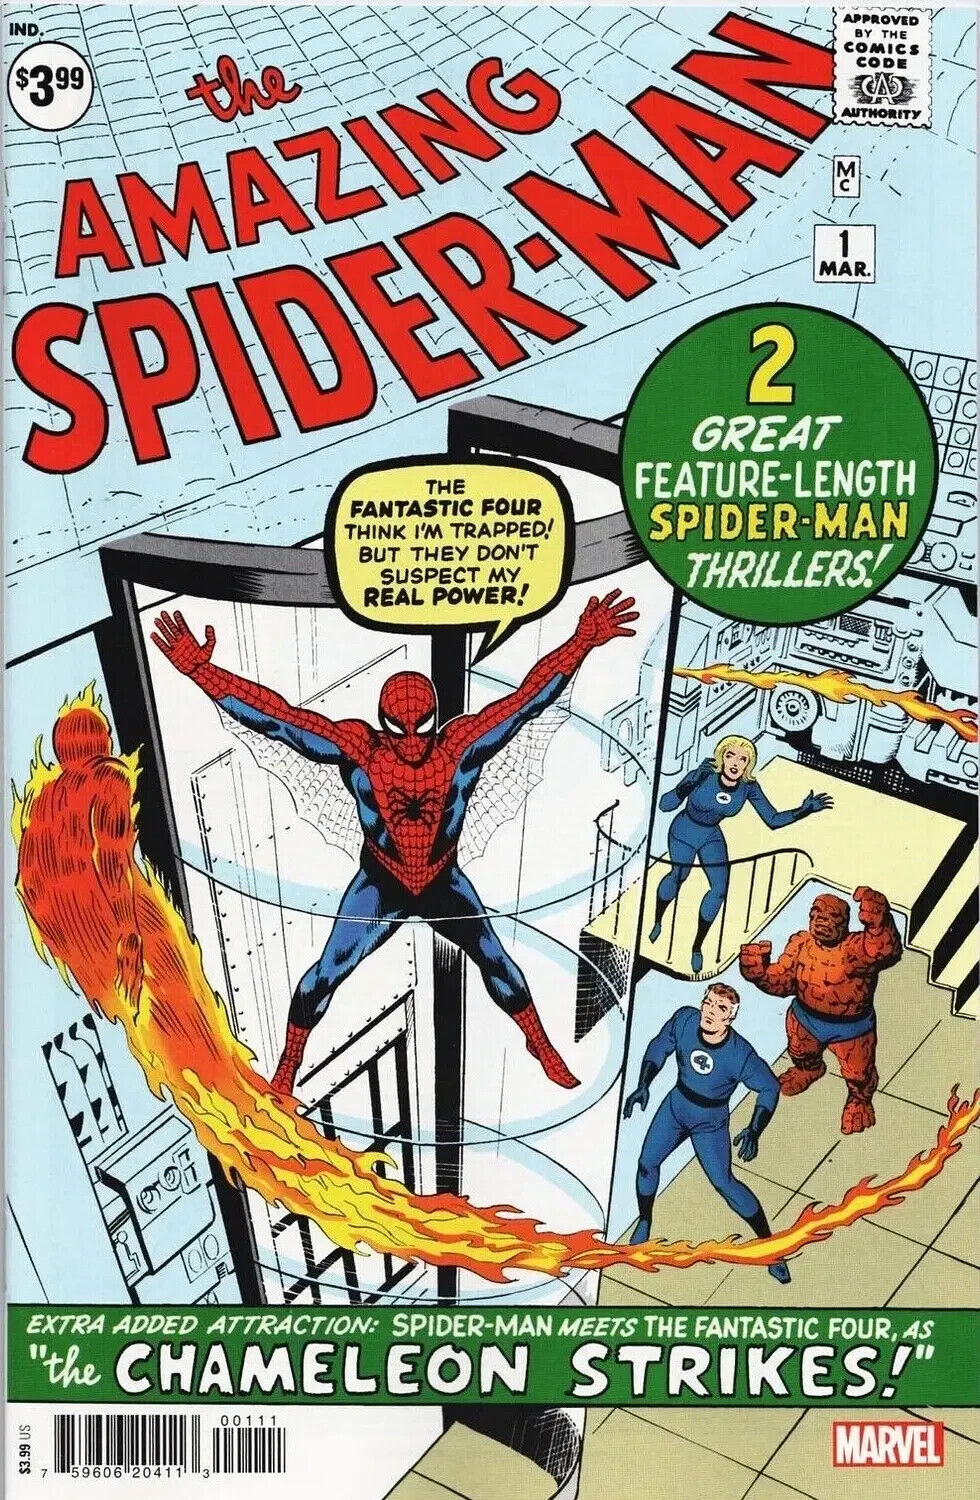 Amazing Spider-Man #1 Facsimile Edition NM or Better